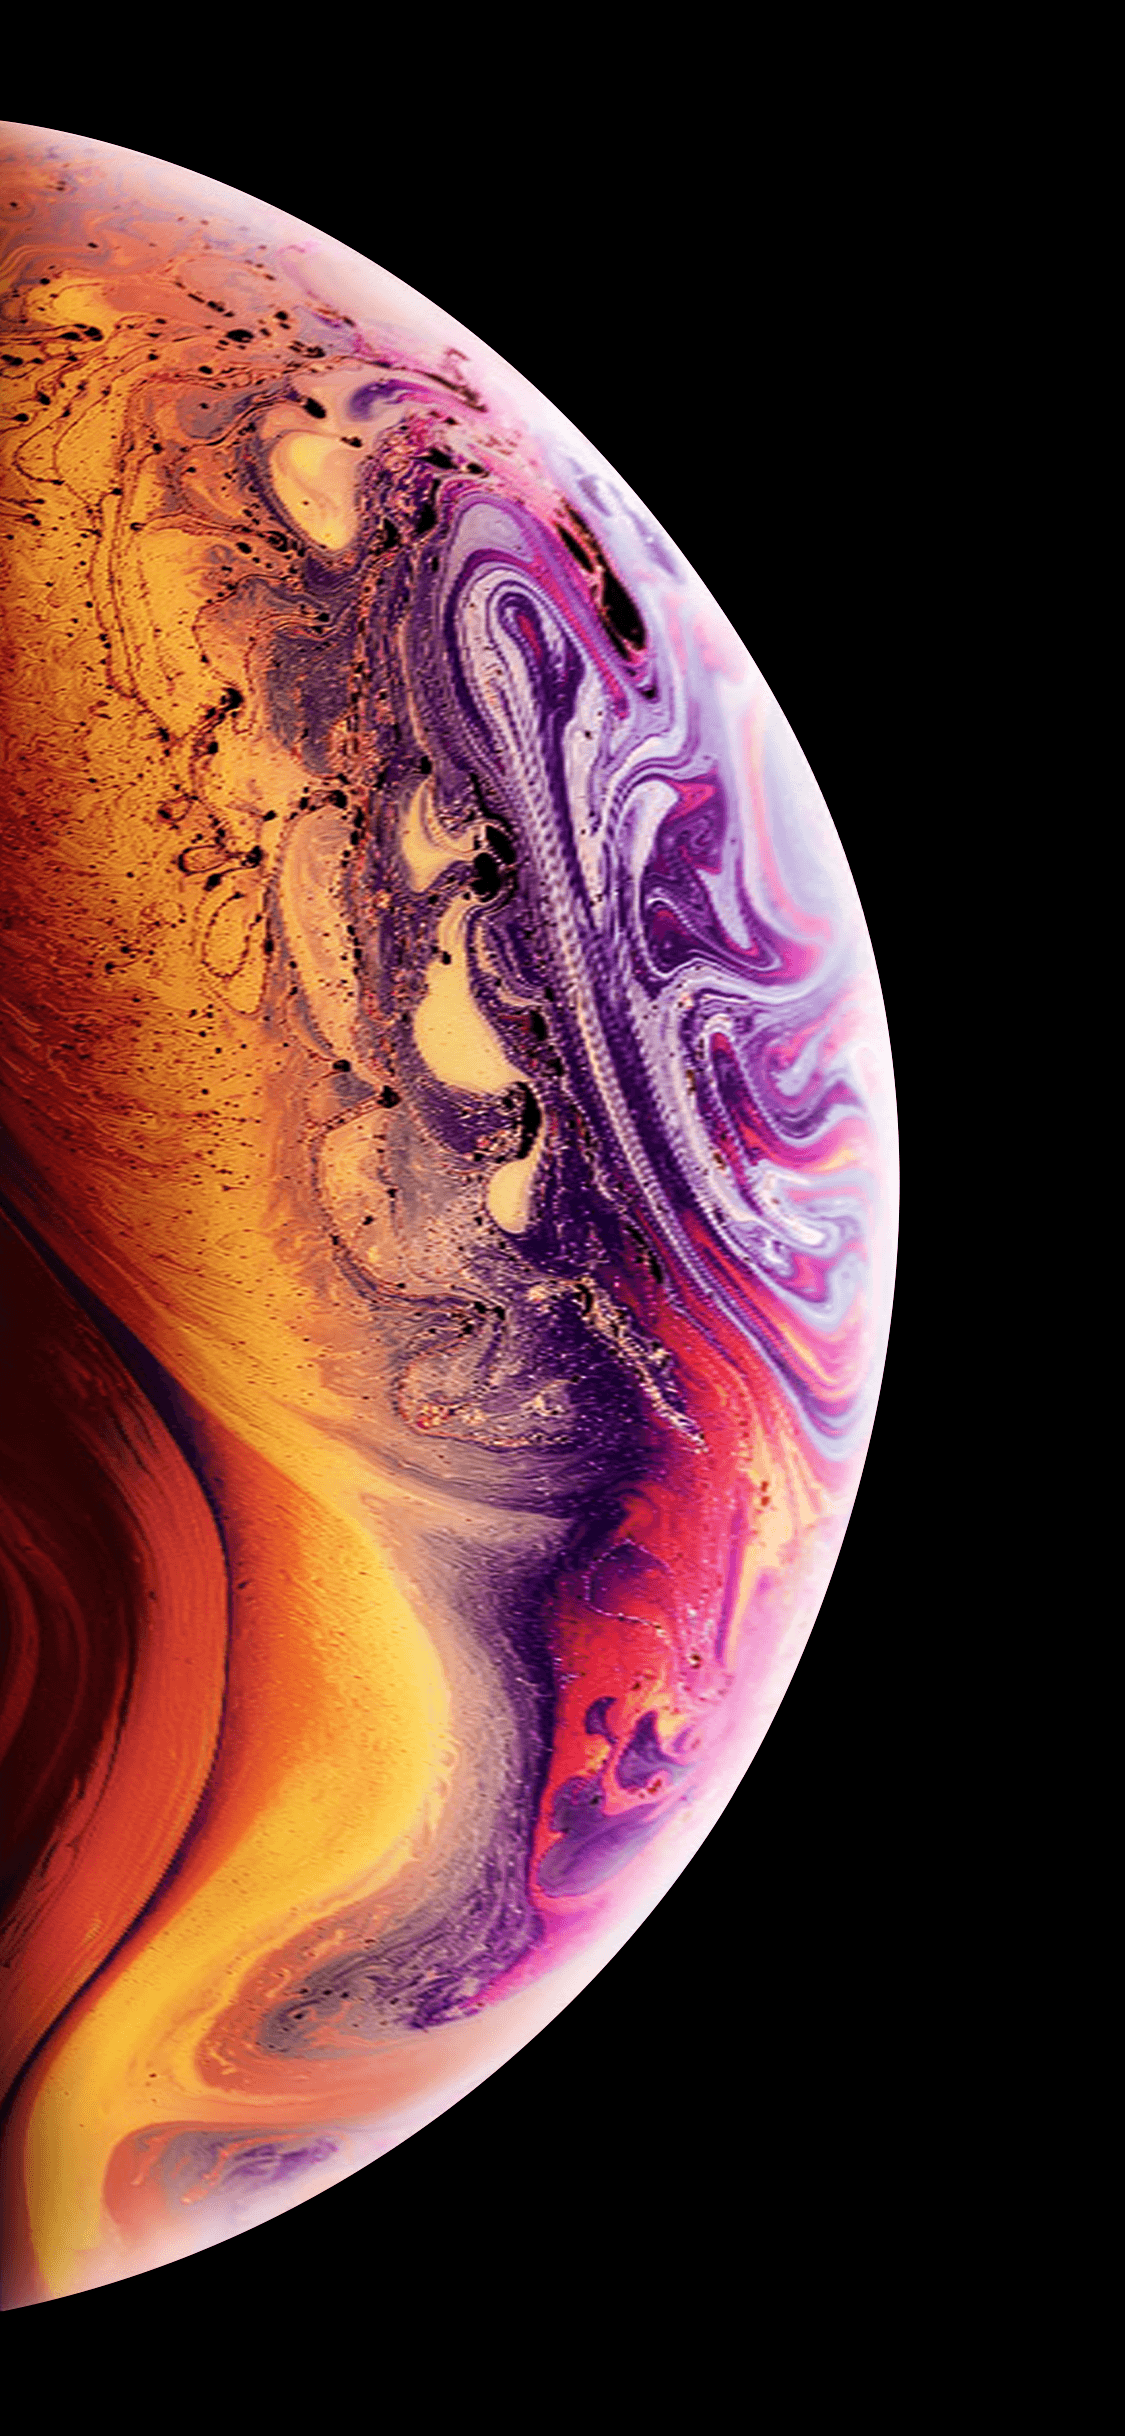 Download an Unofficial 'iPhone XS' Wallpaper Here If You're